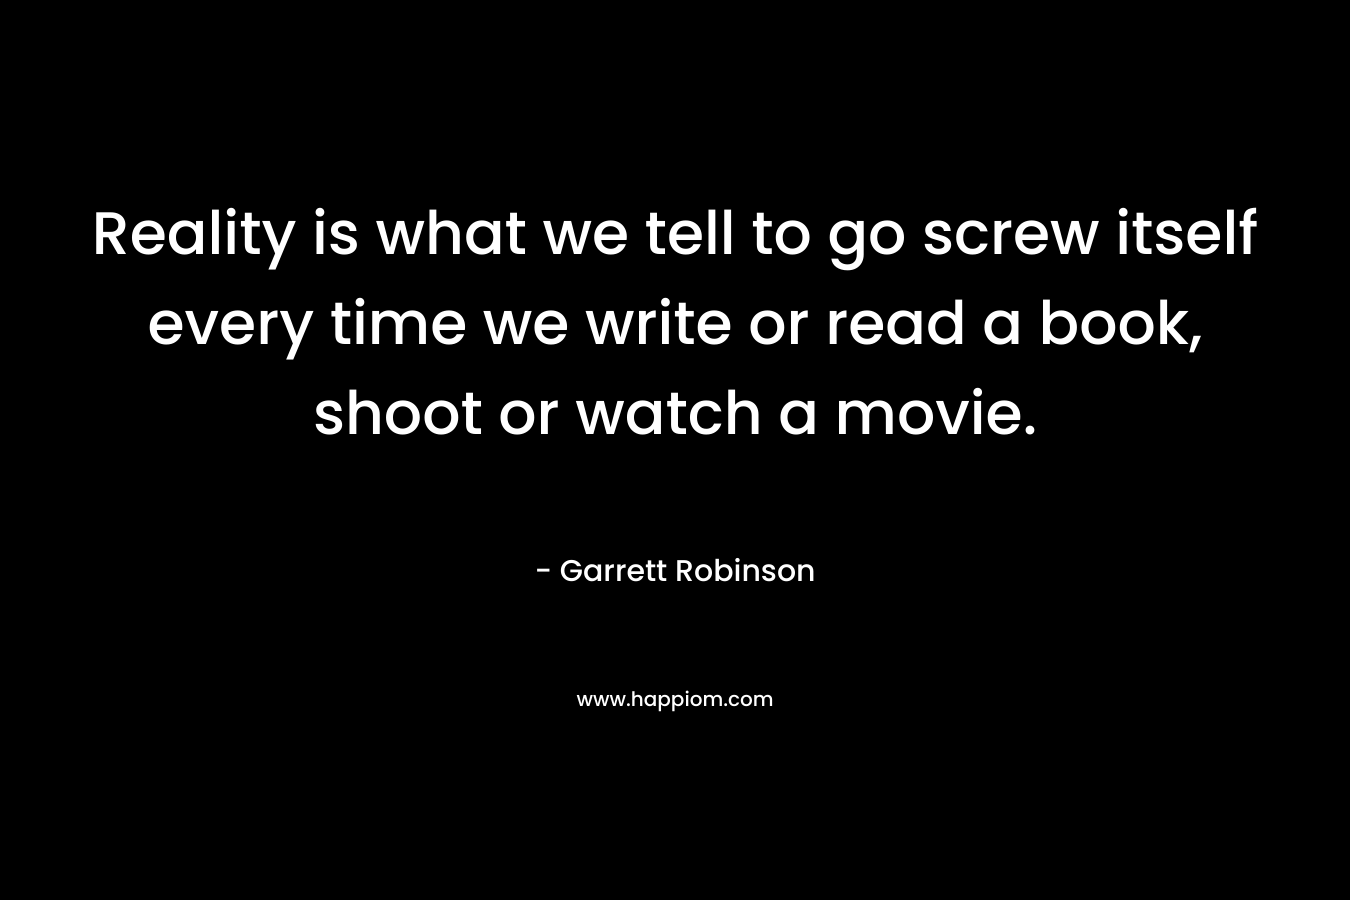 Reality is what we tell to go screw itself every time we write or read a book, shoot or watch a movie.